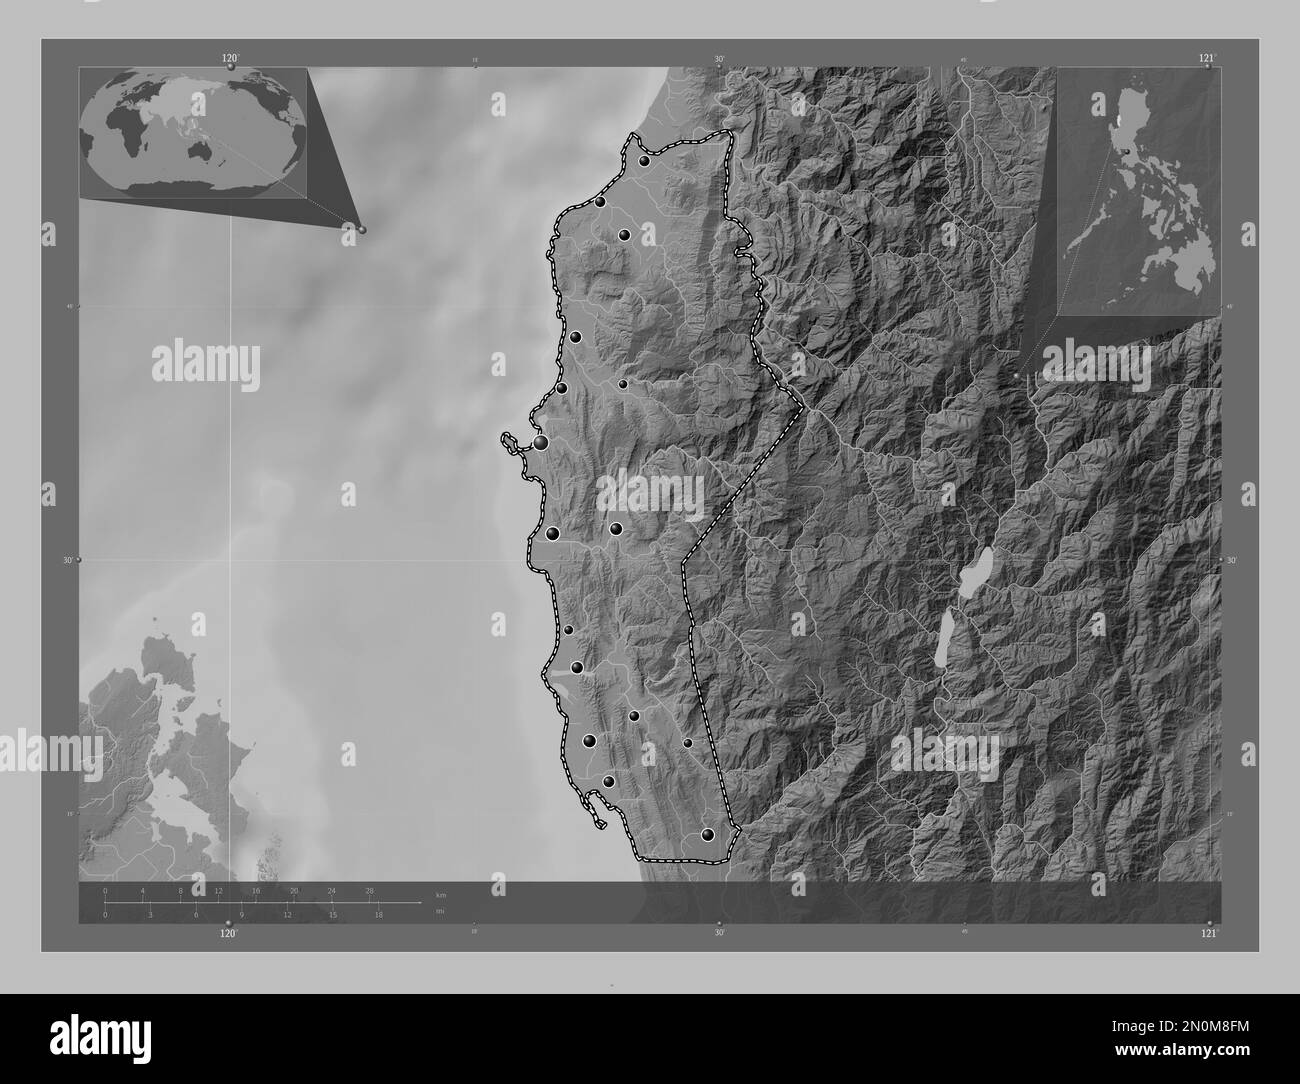 La Union, province of Philippines. Grayscale elevation map with lakes and rivers. Locations of major cities of the region. Corner auxiliary location m Stock Photo